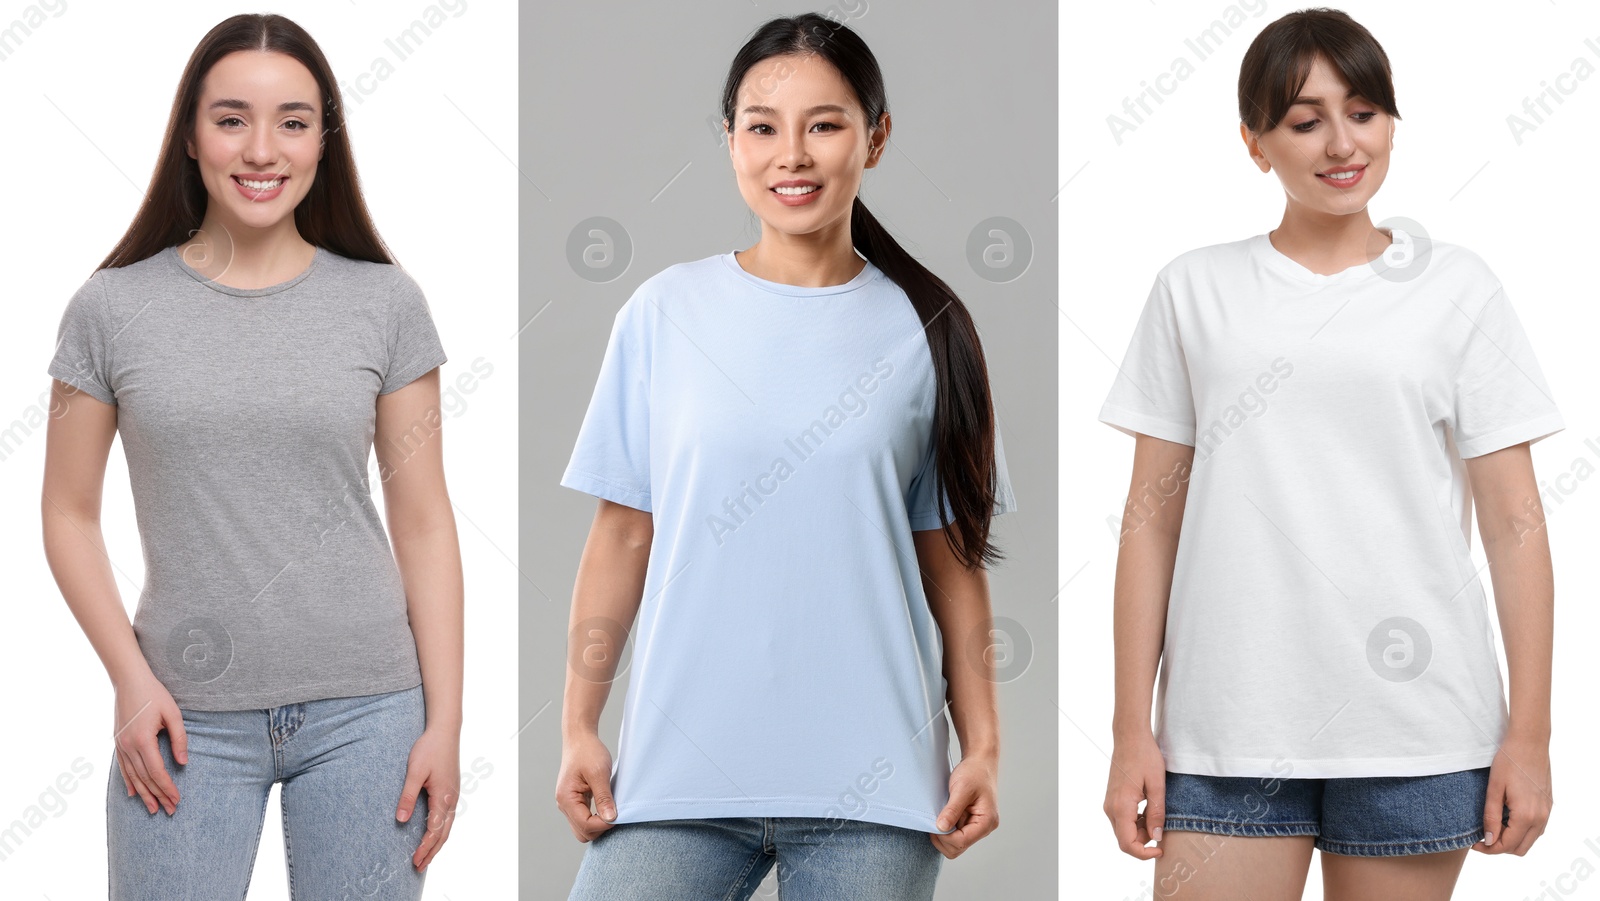 Image of Women in t-shirts on different color backgrounds. Collage of photos